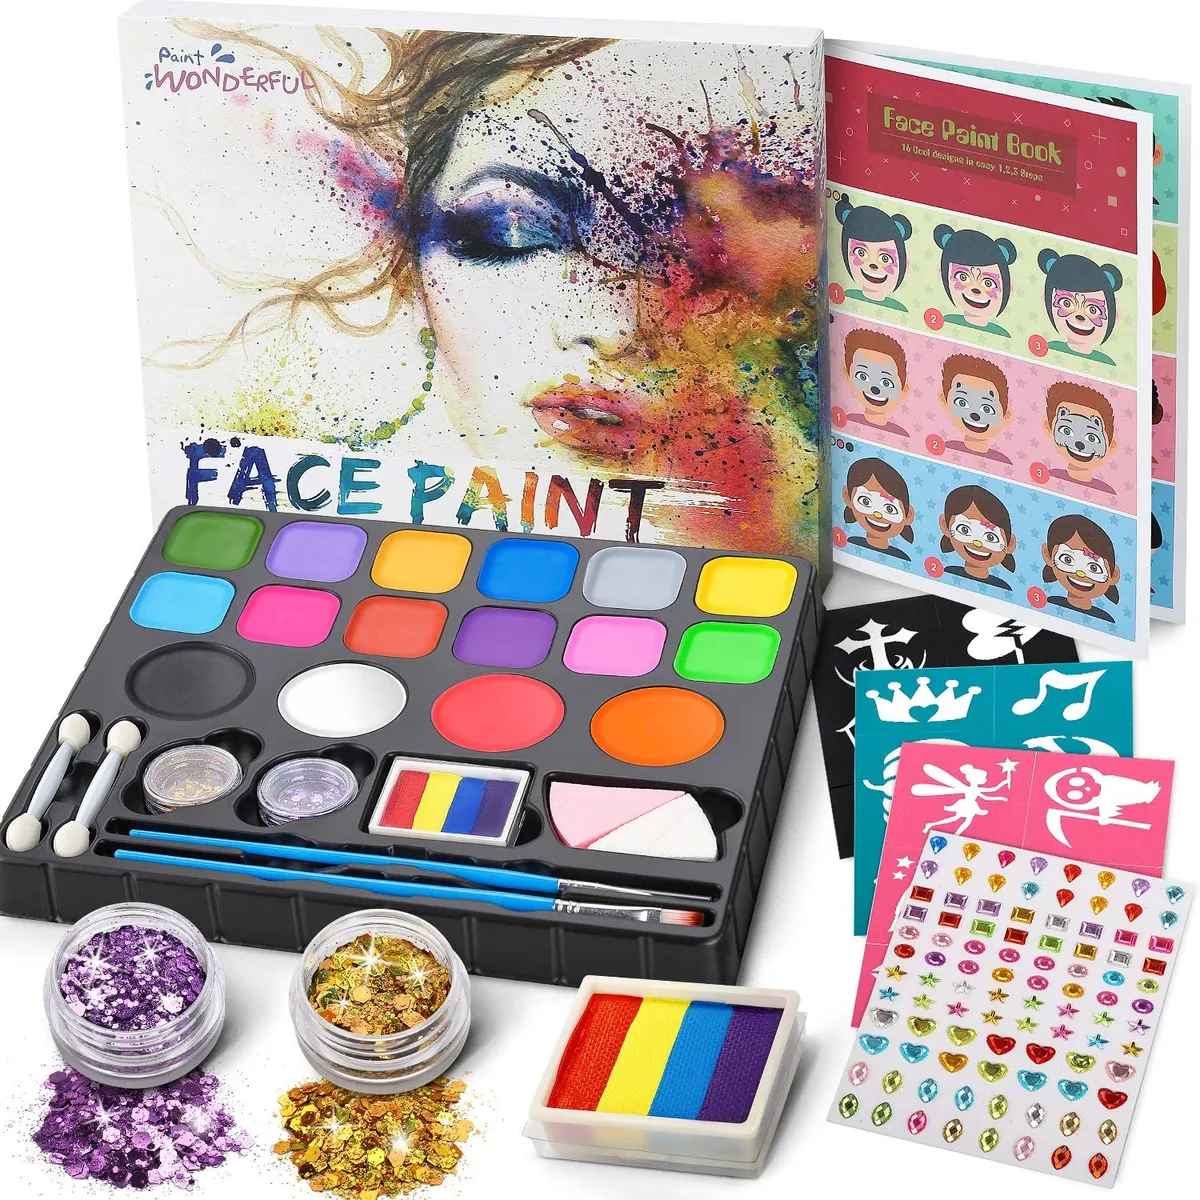 Face painting kits for adults